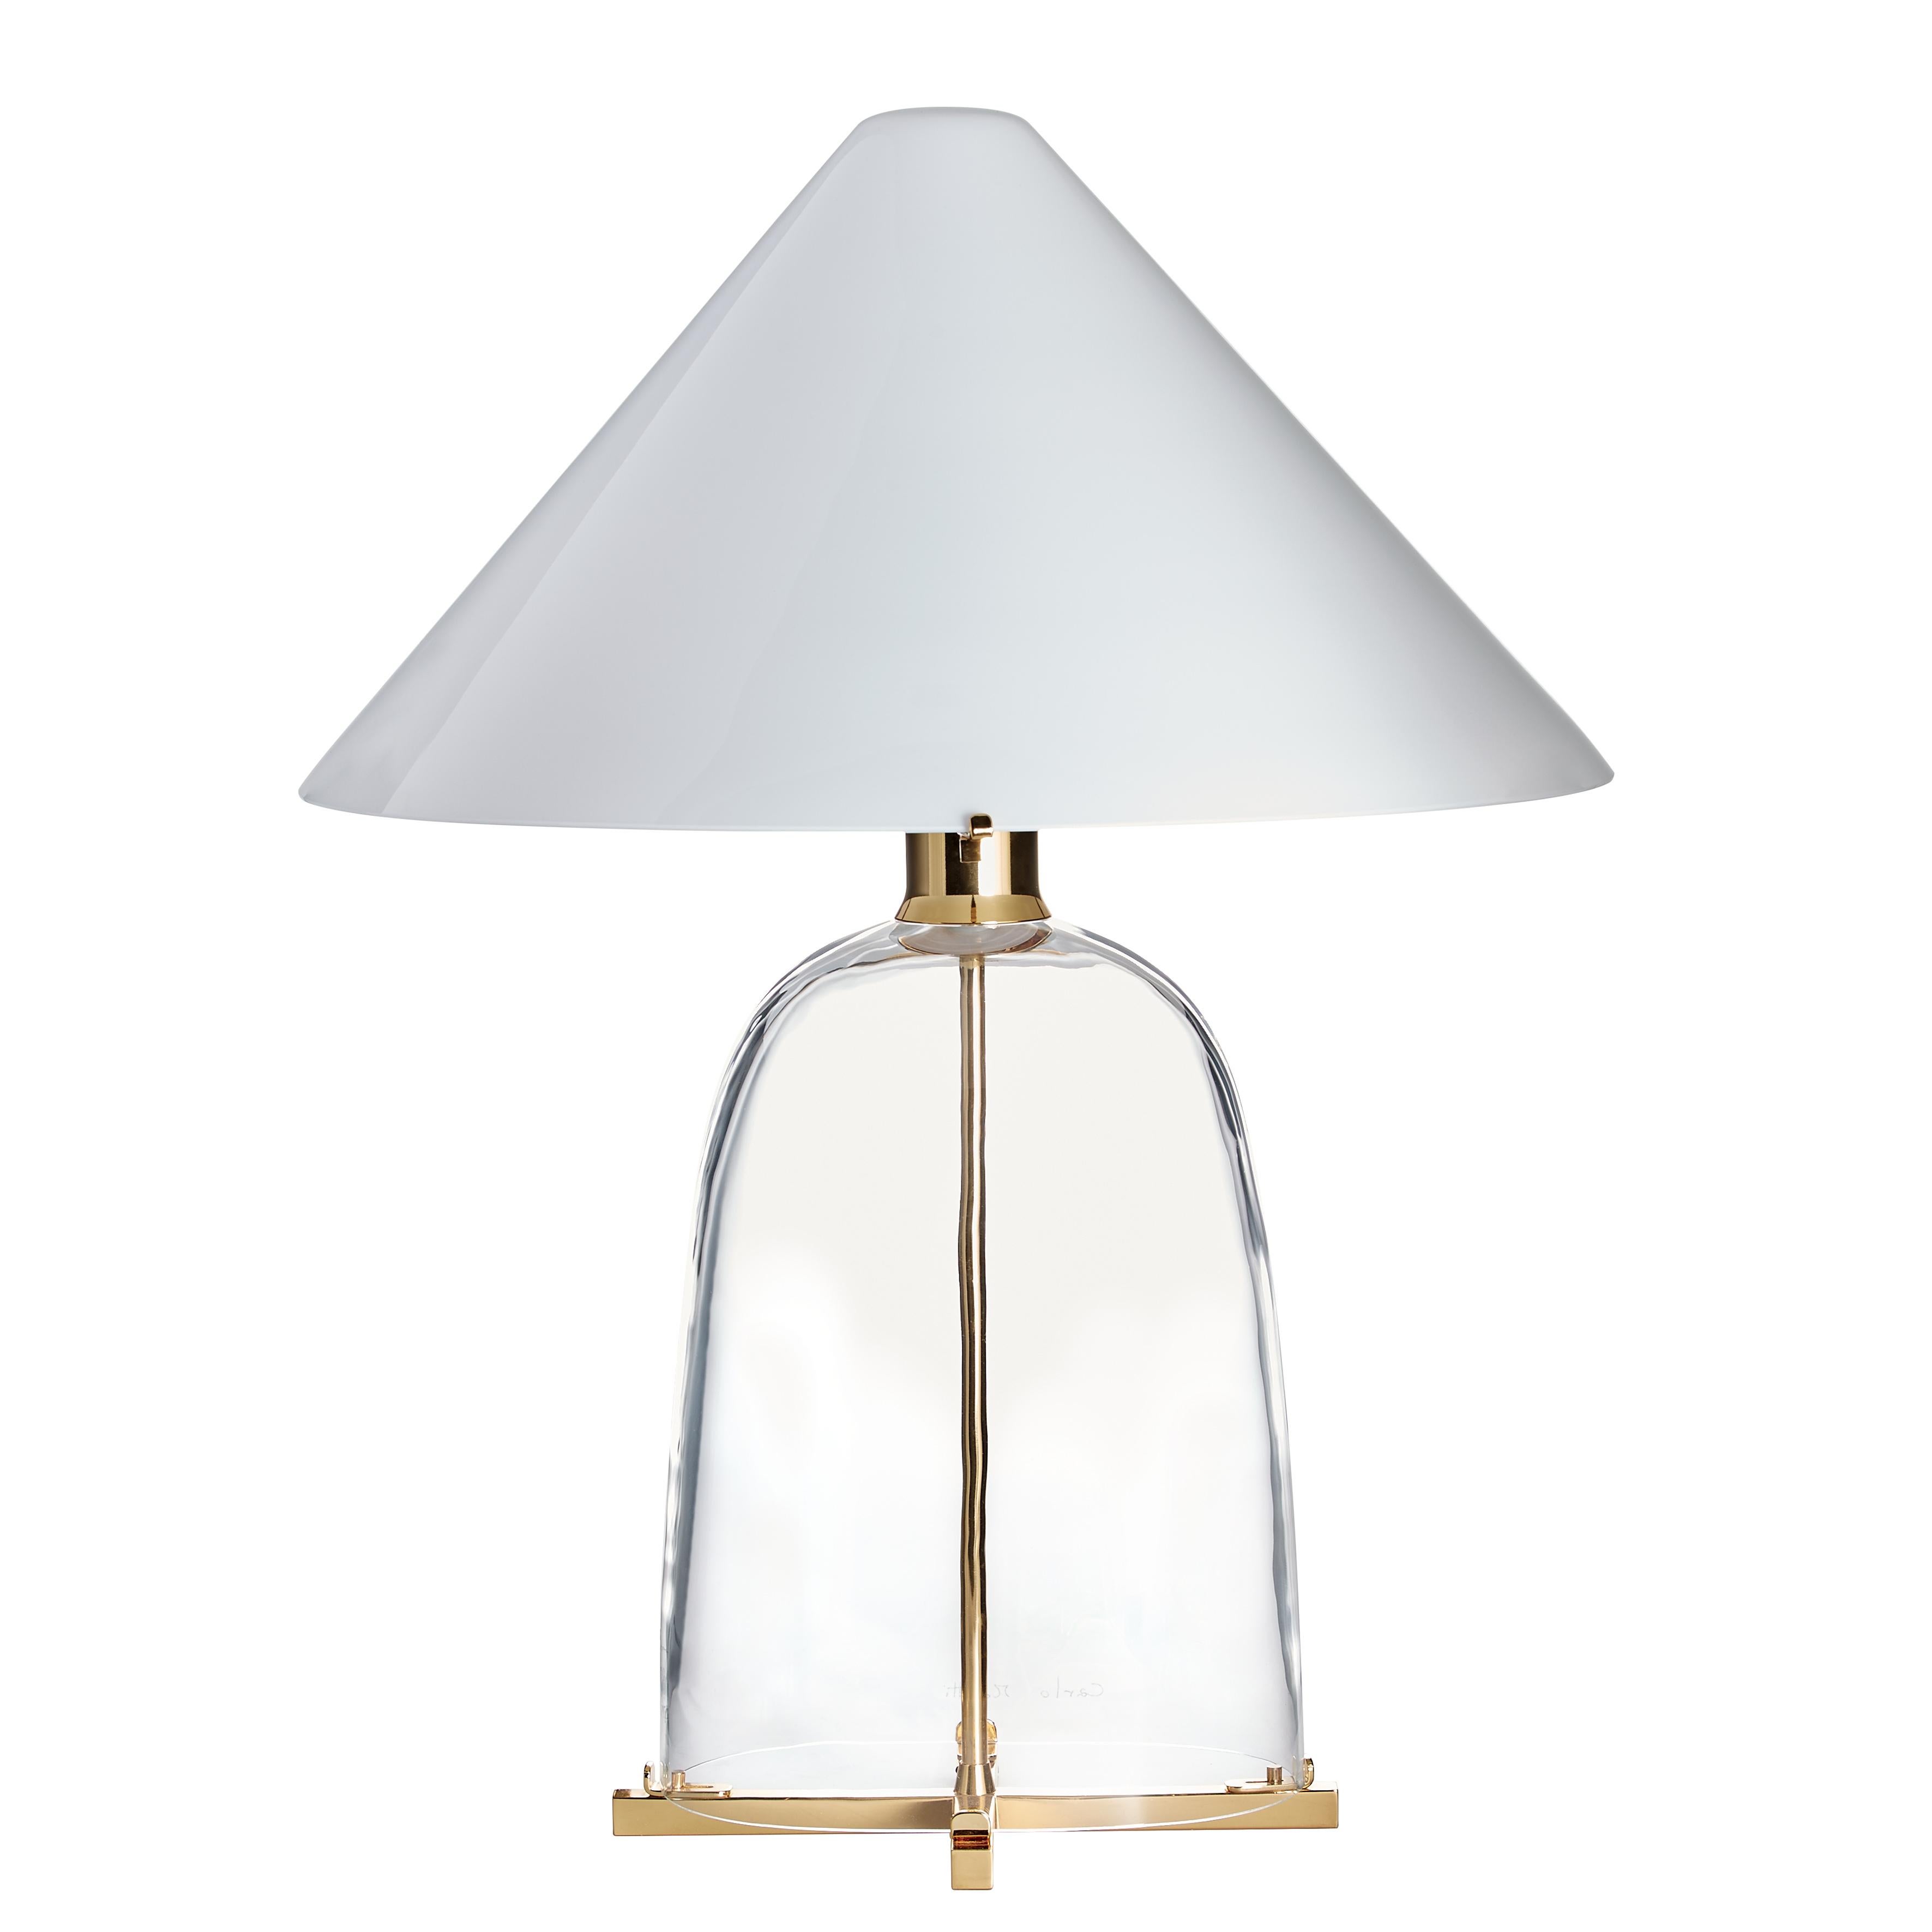 Polished Ovale Carlo Moretti Mouth Blown Murano Glass Table Lamp Shade, Shade Only For Sale